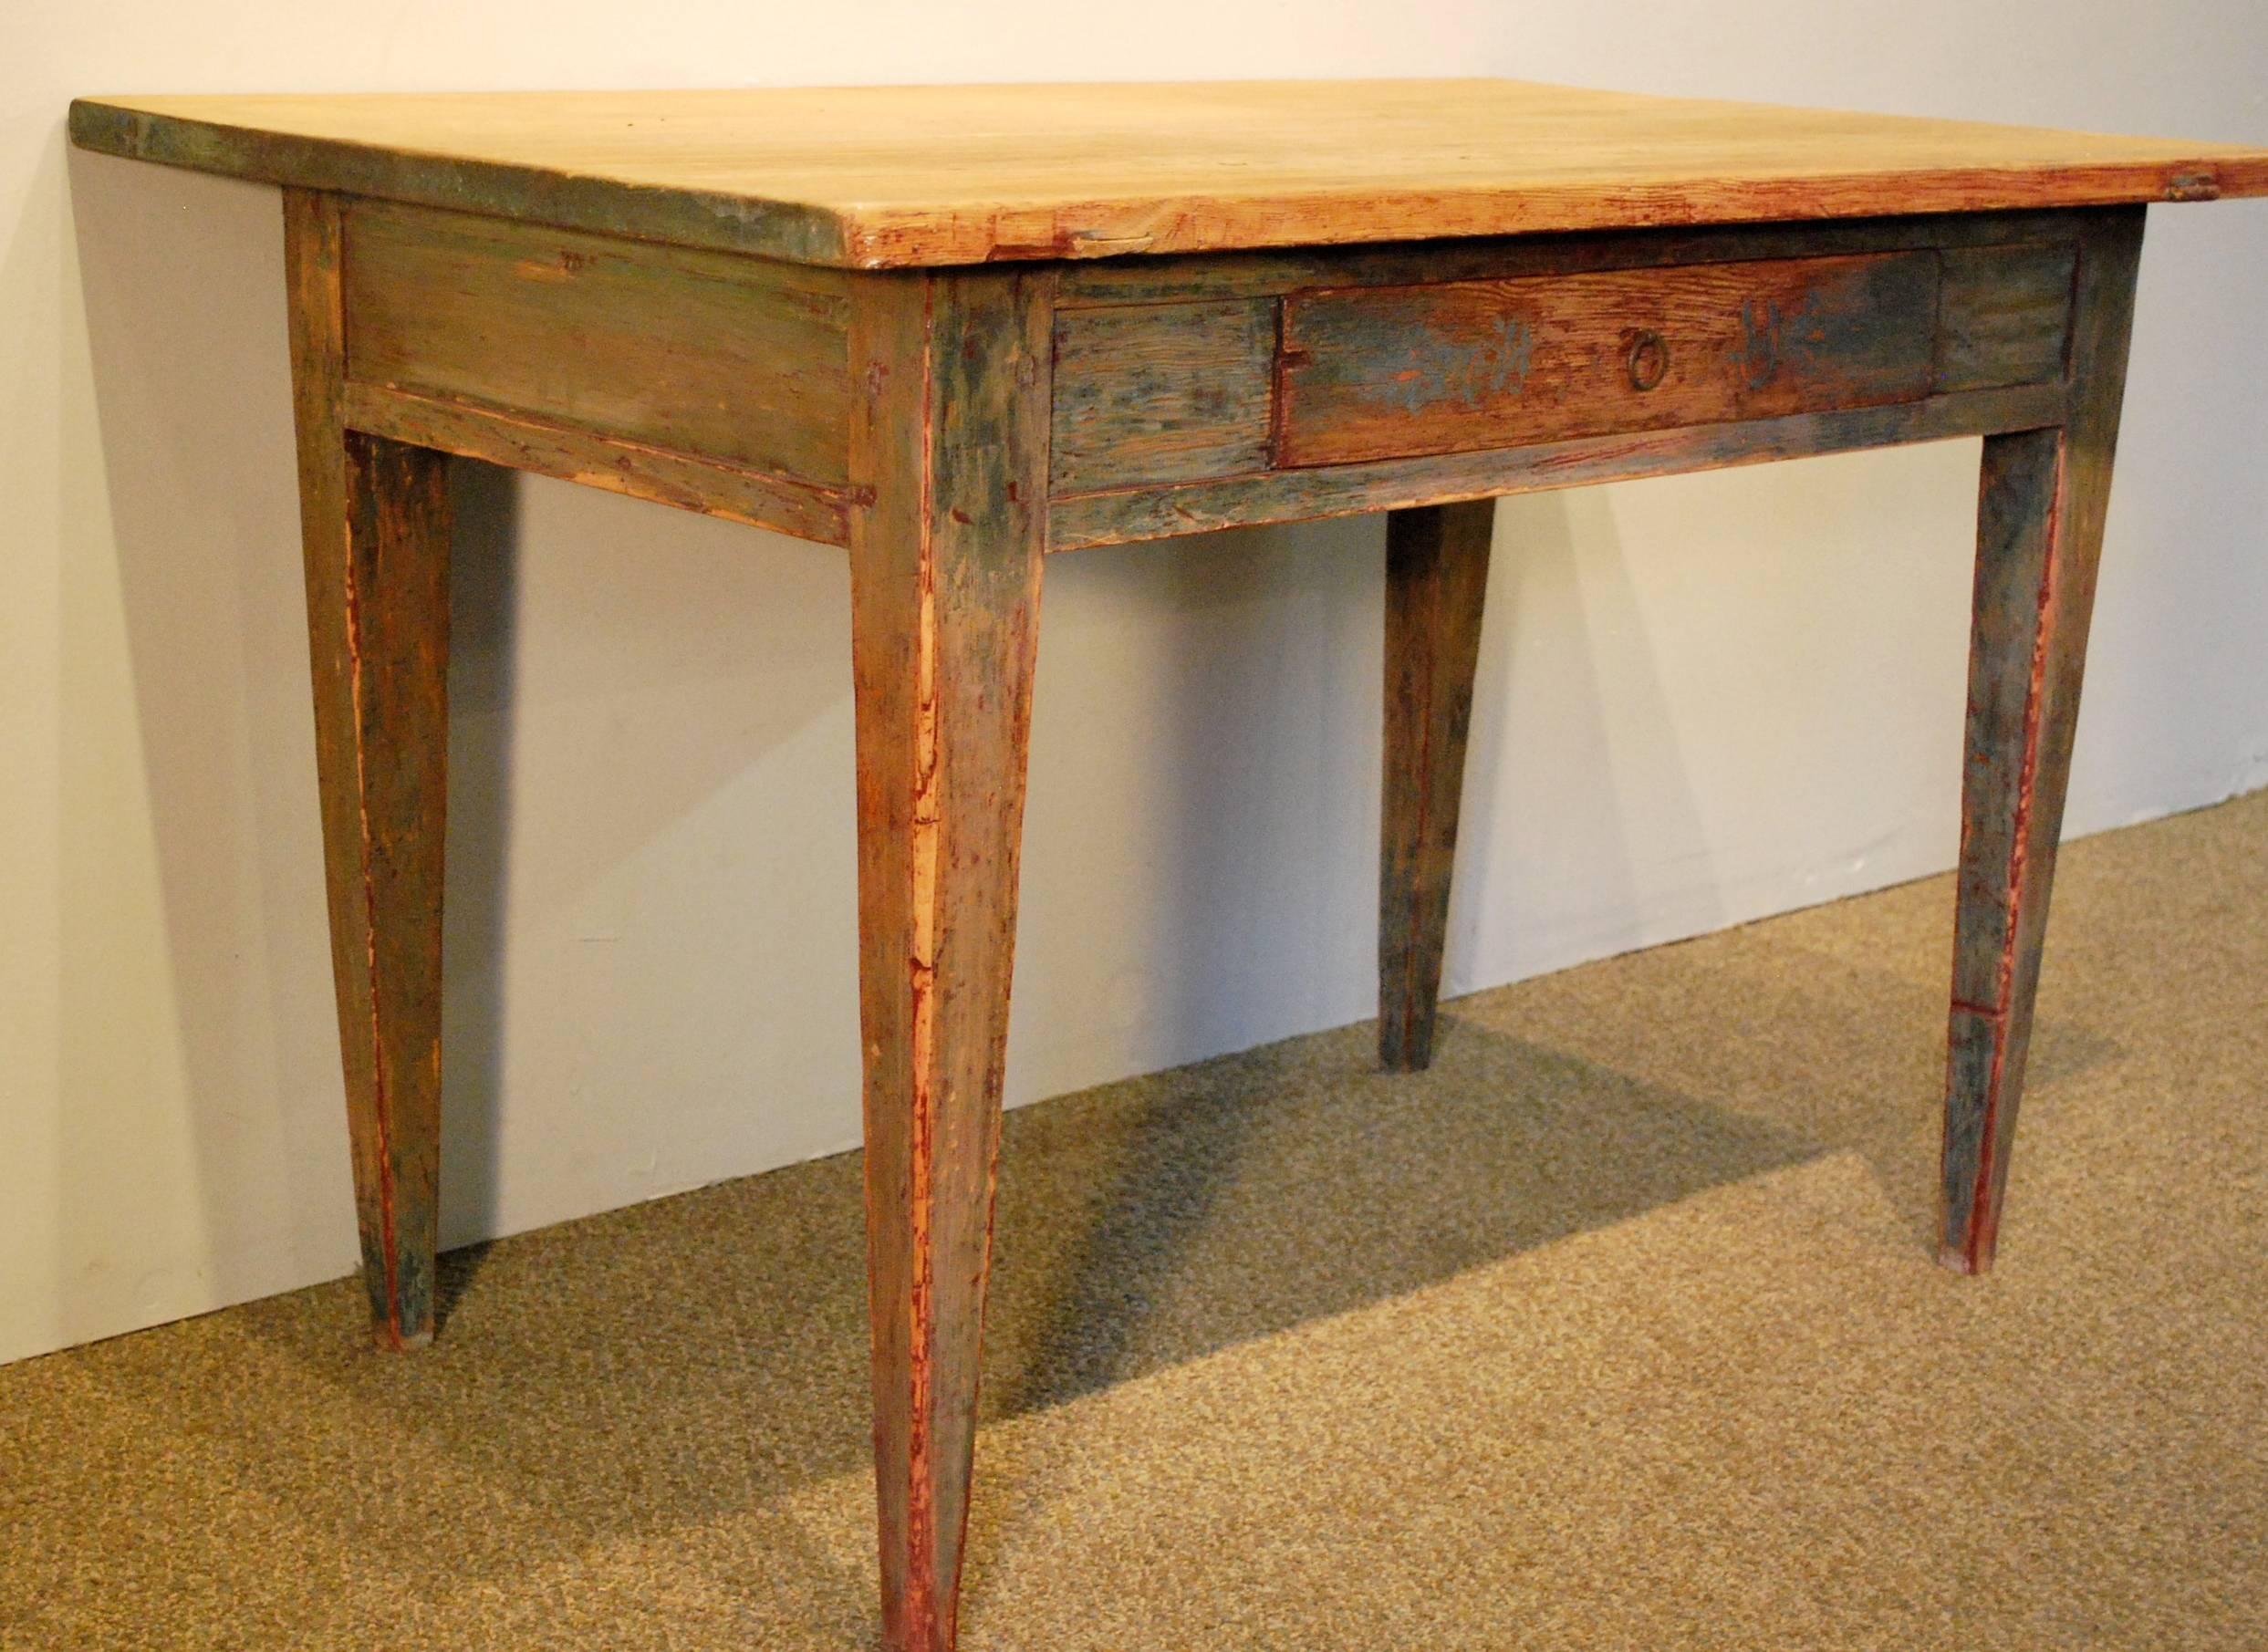 An antique Swedish writing table with one drawer, tapered legs, and hand scrapped to reveal the remnants of the original paintwork. The top has not been sanded and retains the desirable time worn ridges. George Nakashima called it 